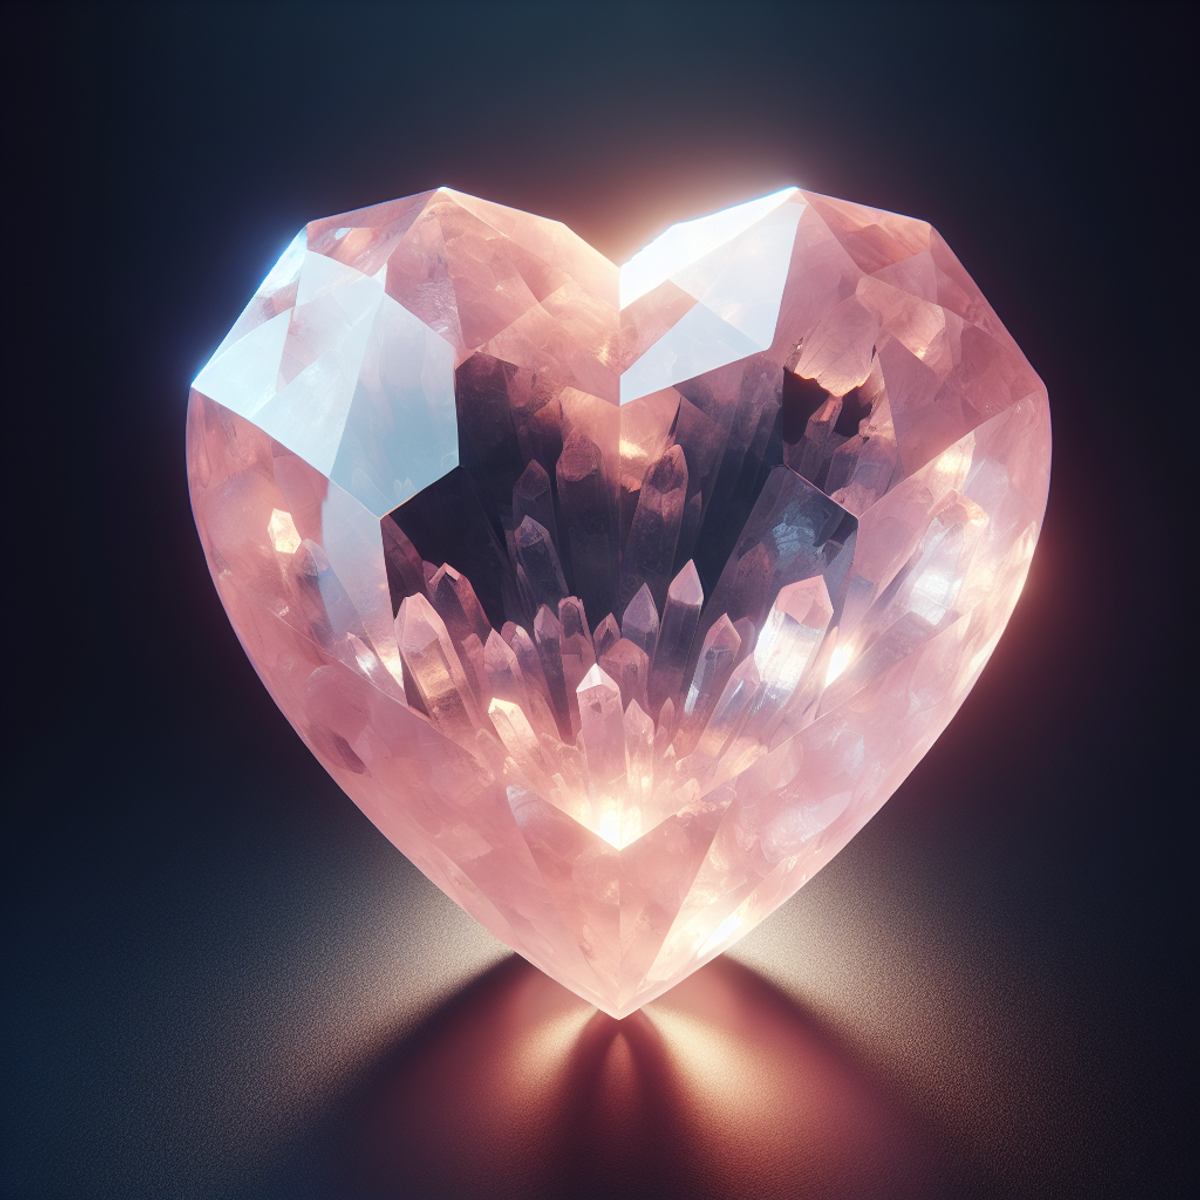 A heart-shaped rose quartz crystal glowing radiantly.